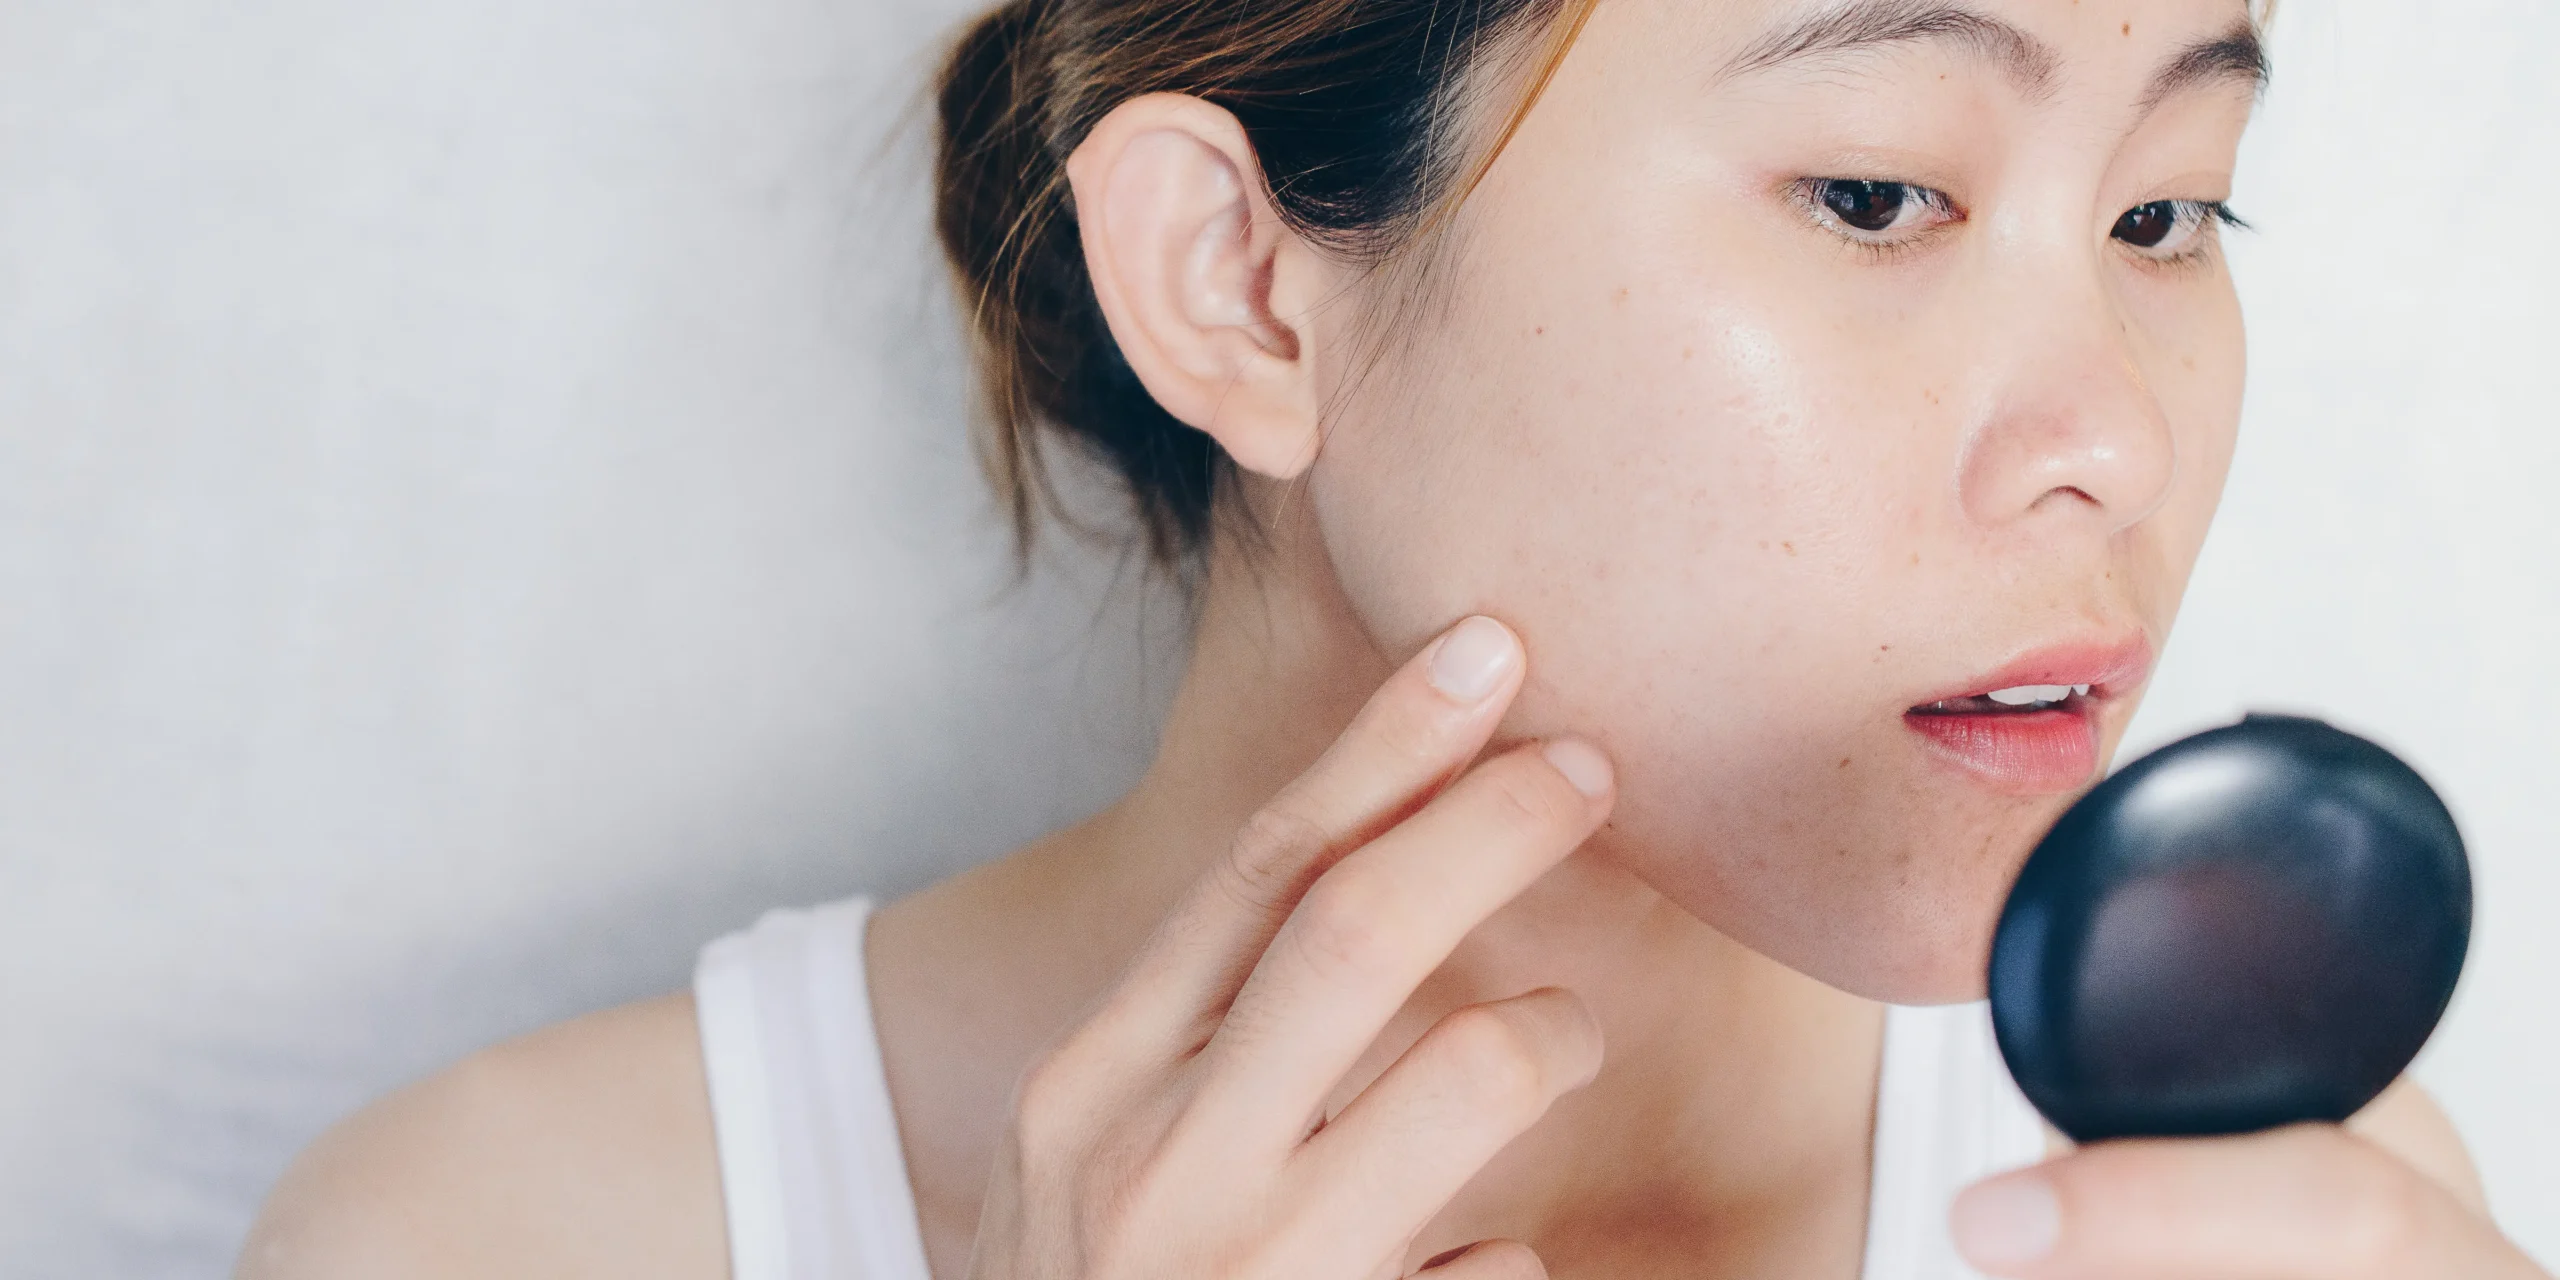 Understanding What Really Causes Acne – And How To Treat It Effectively